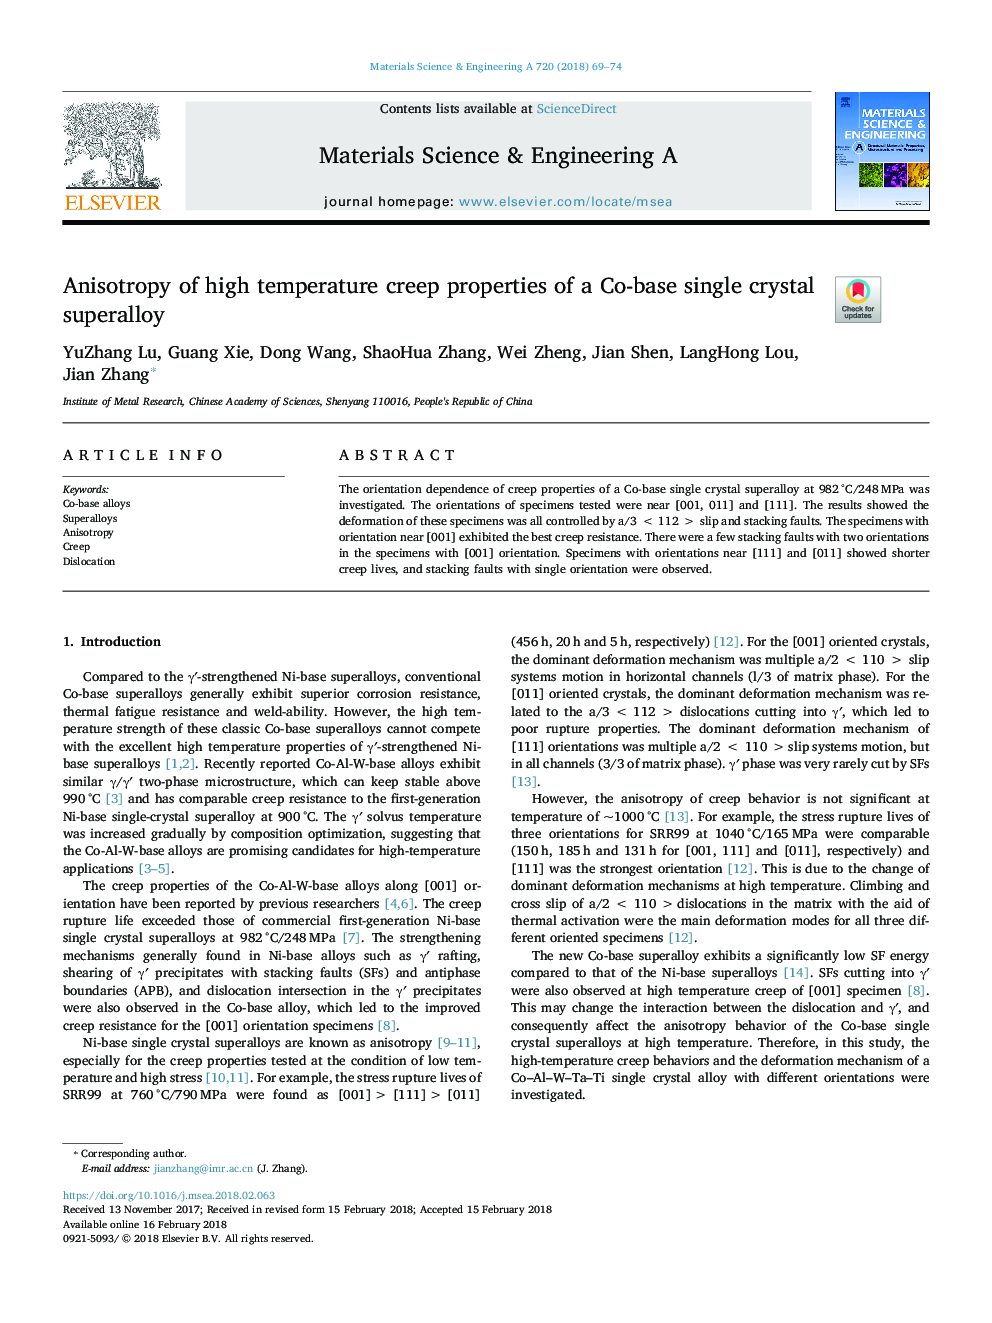 Anisotropy of high temperature creep properties of a Co-base single crystal superalloy